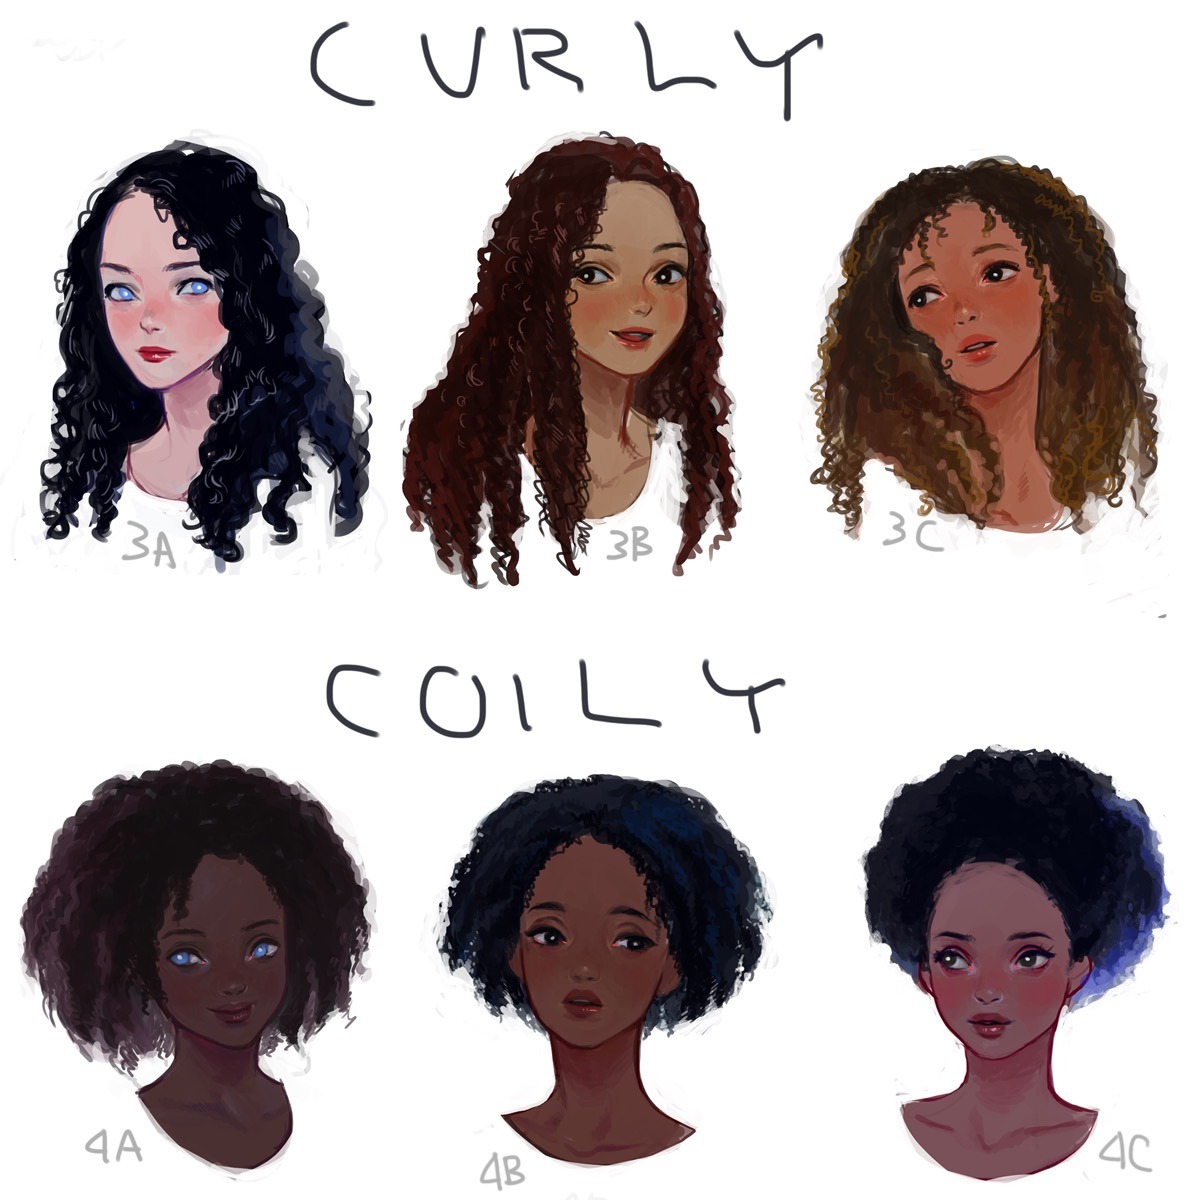 eafuransu:  I drew a visual hair type classification guide. I thought I’d share